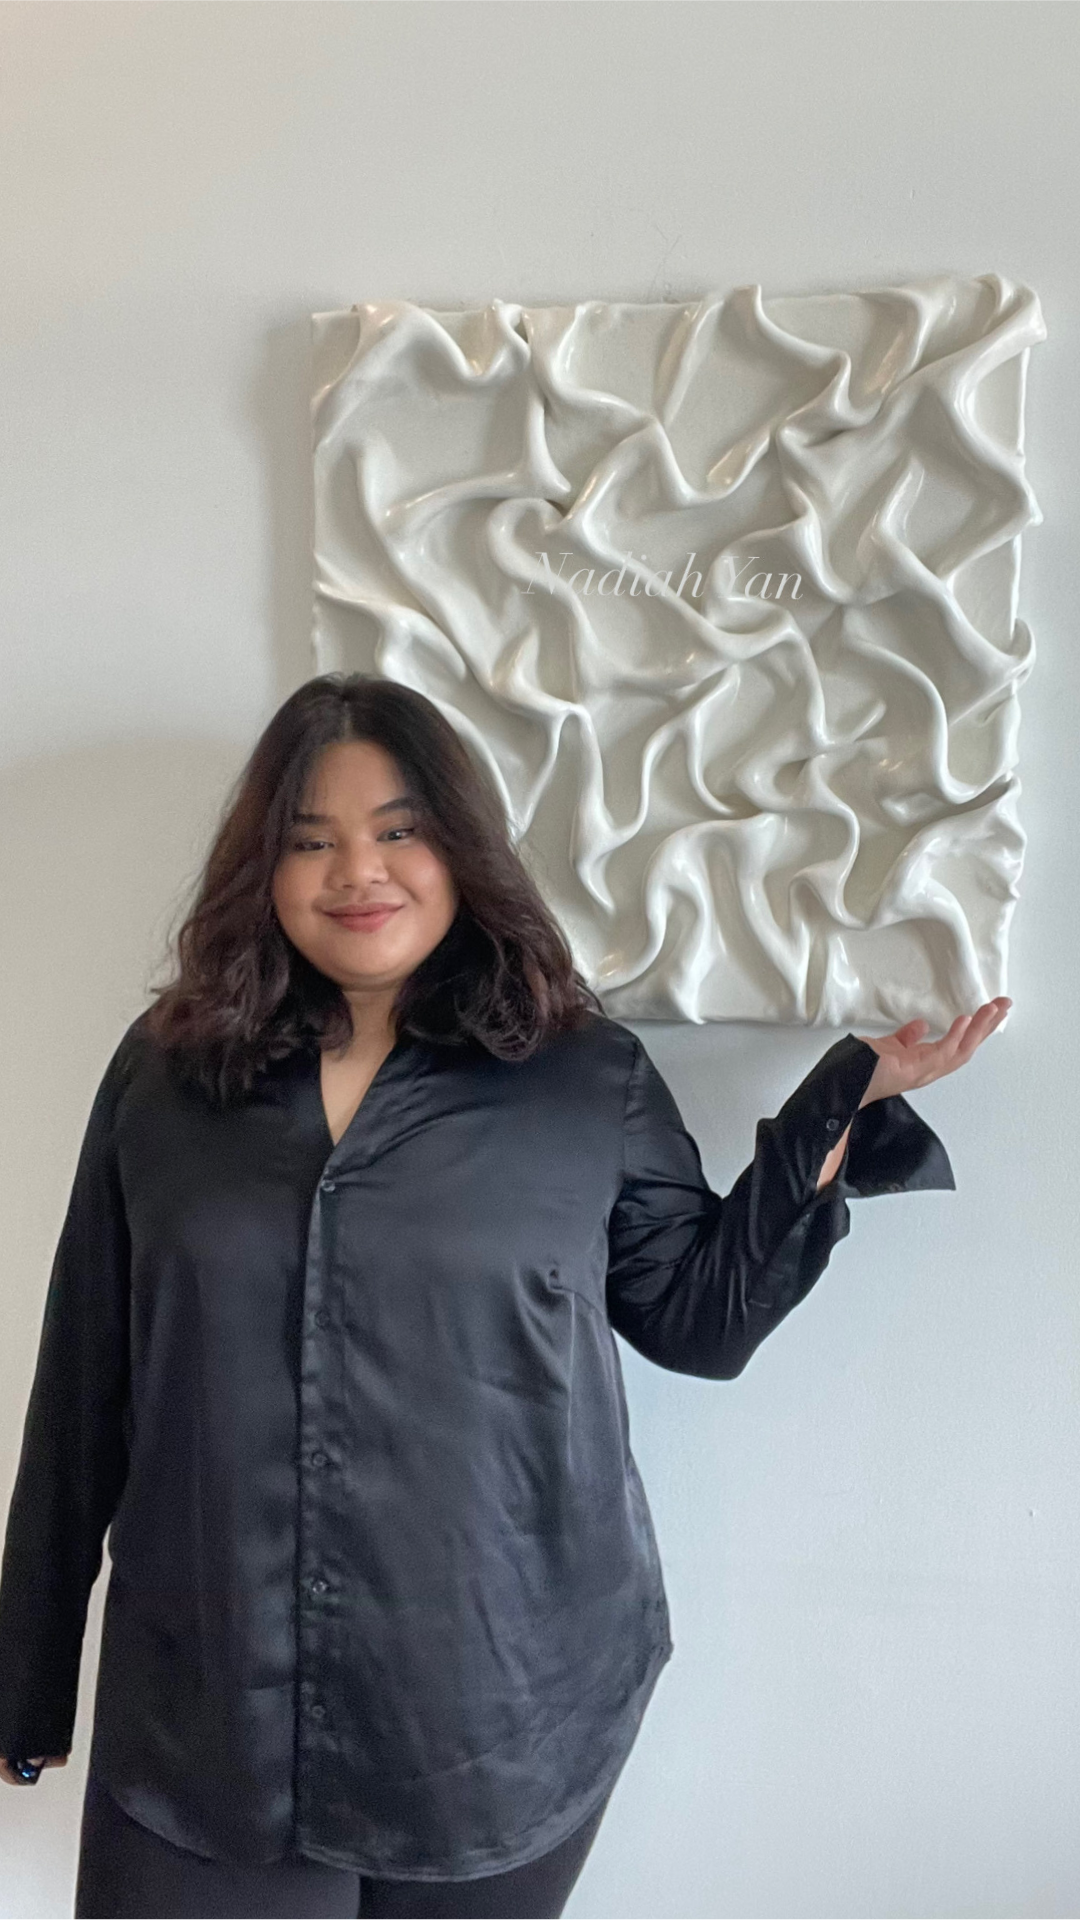 Nadiah yan, with one of her abstract paintings